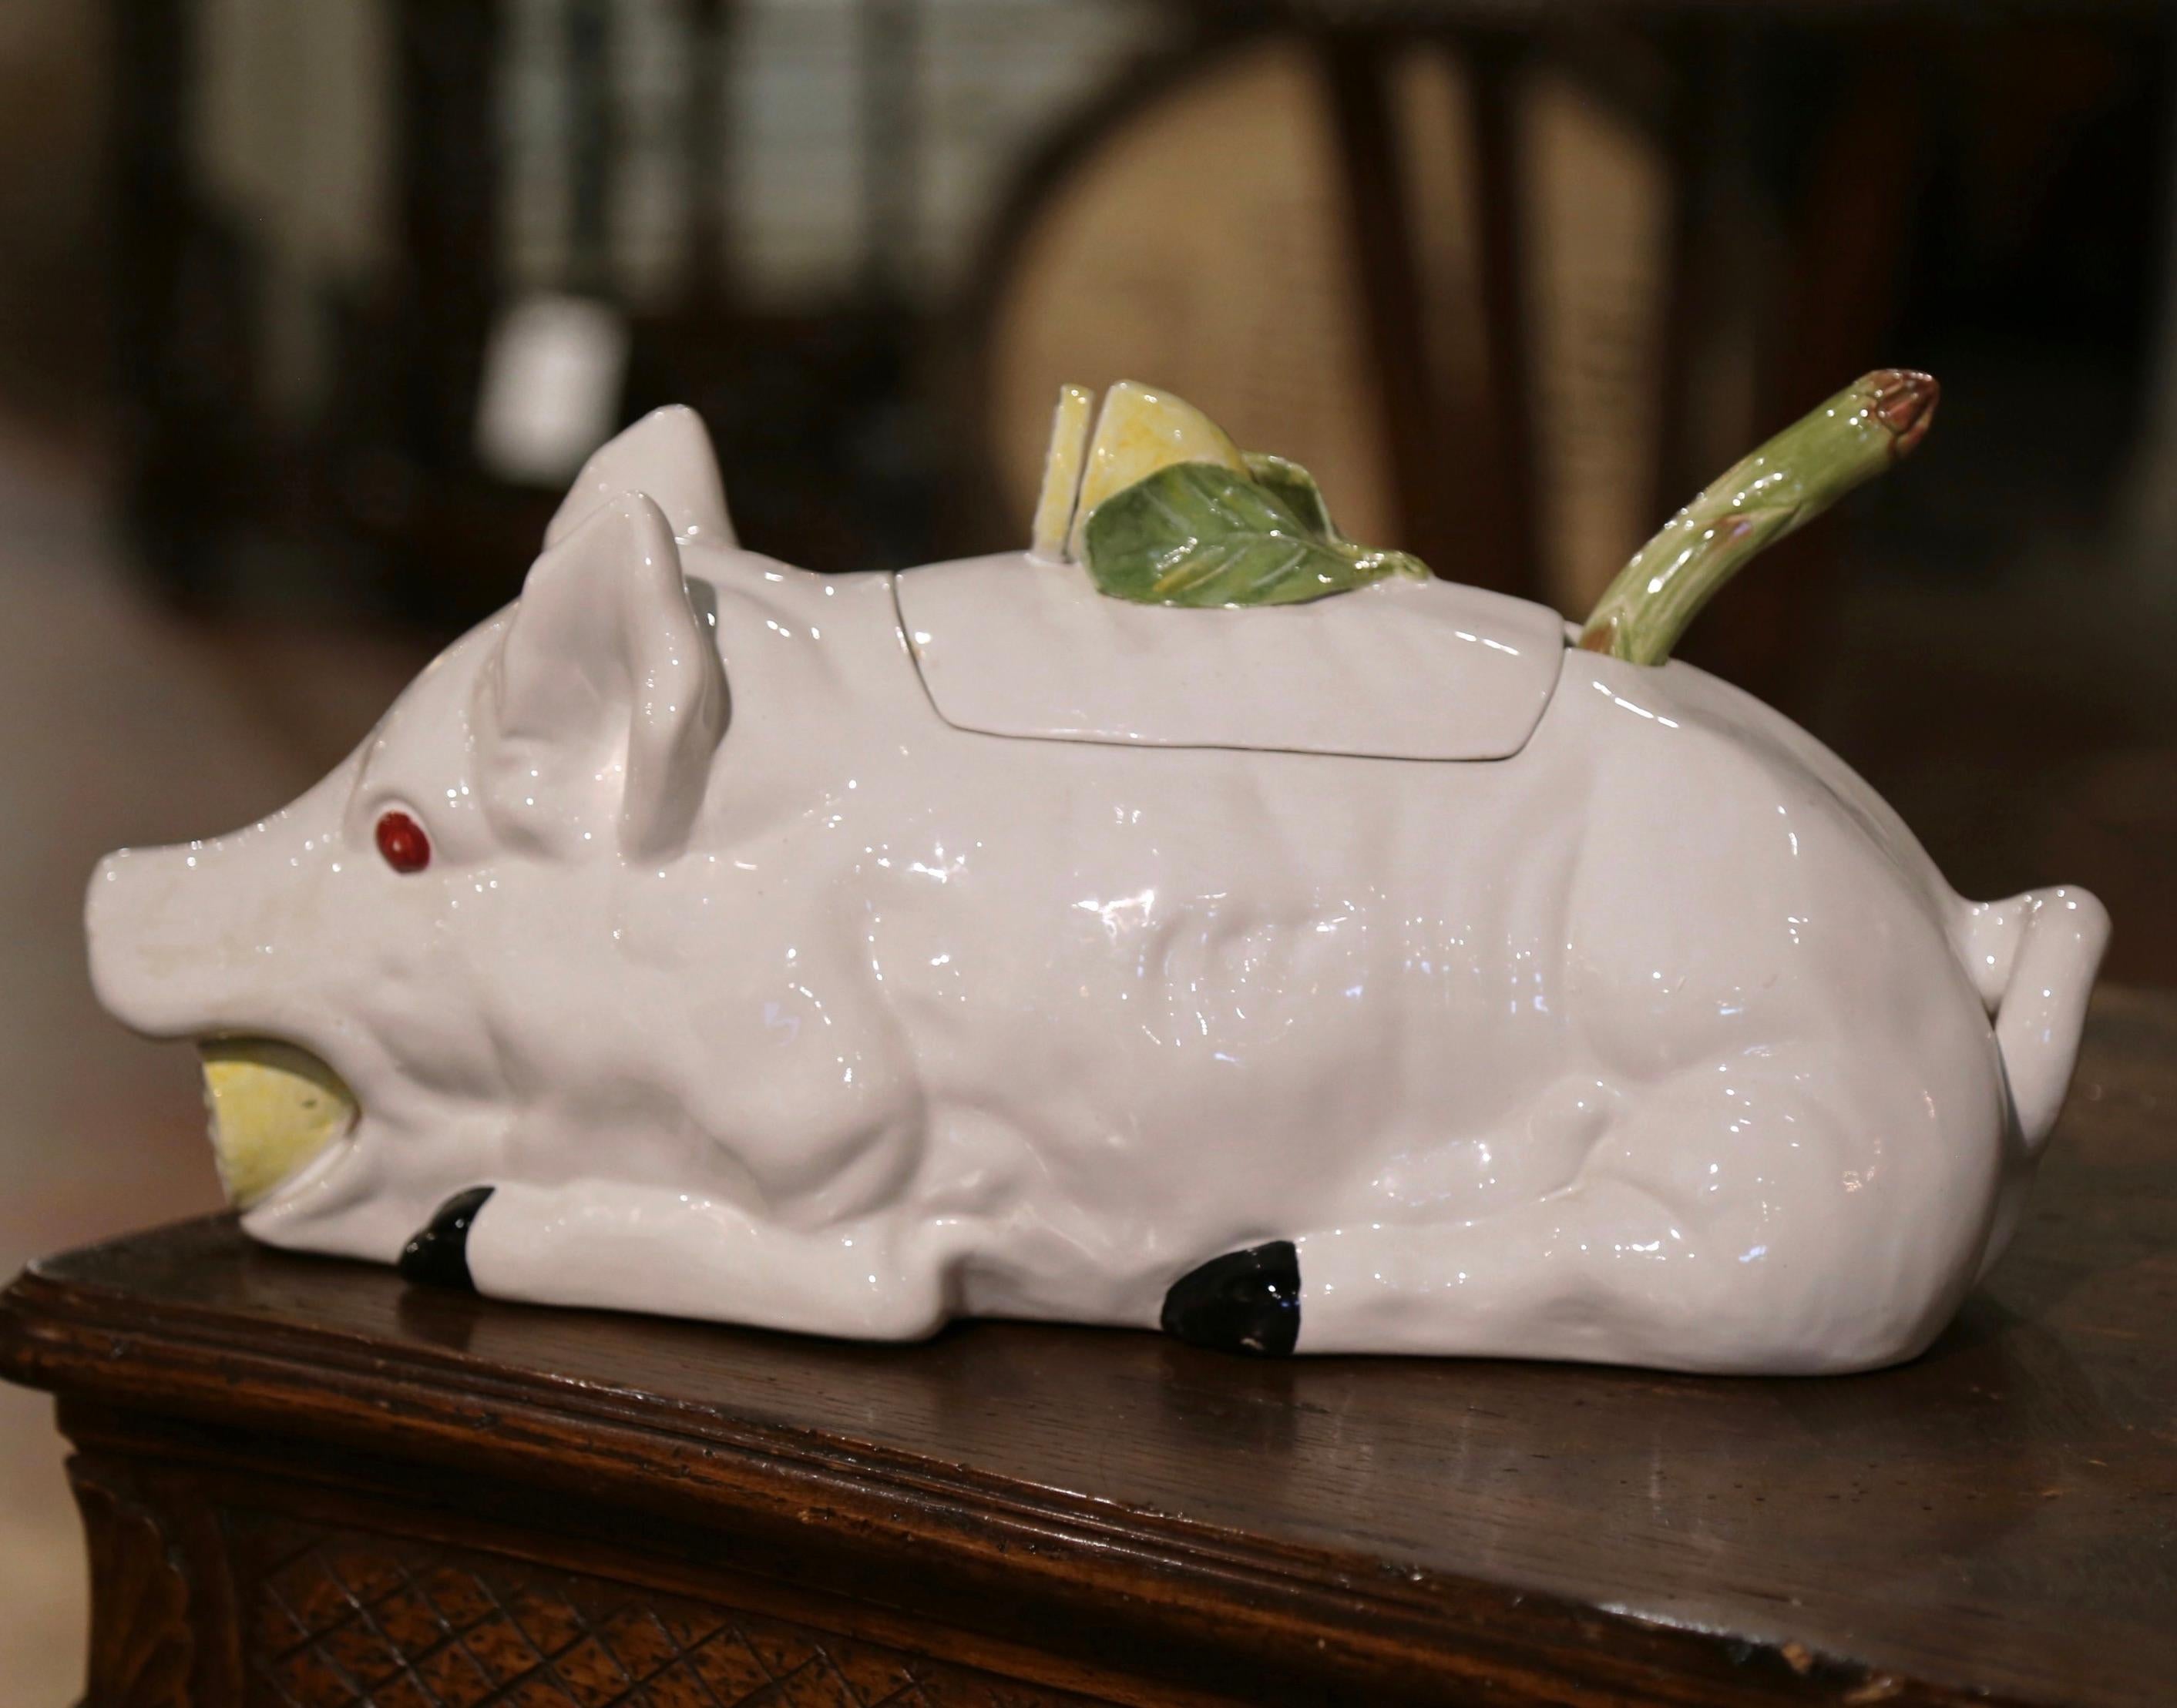 Decorate a dining table with this cheerful Majolica centerpiece. Crafted in Italy circa 1980, the decorative tureen is shaped as a pig resting, his mouth opened holding a lemon. The removable lid, embellished with leaf and lemon decor; when opens,